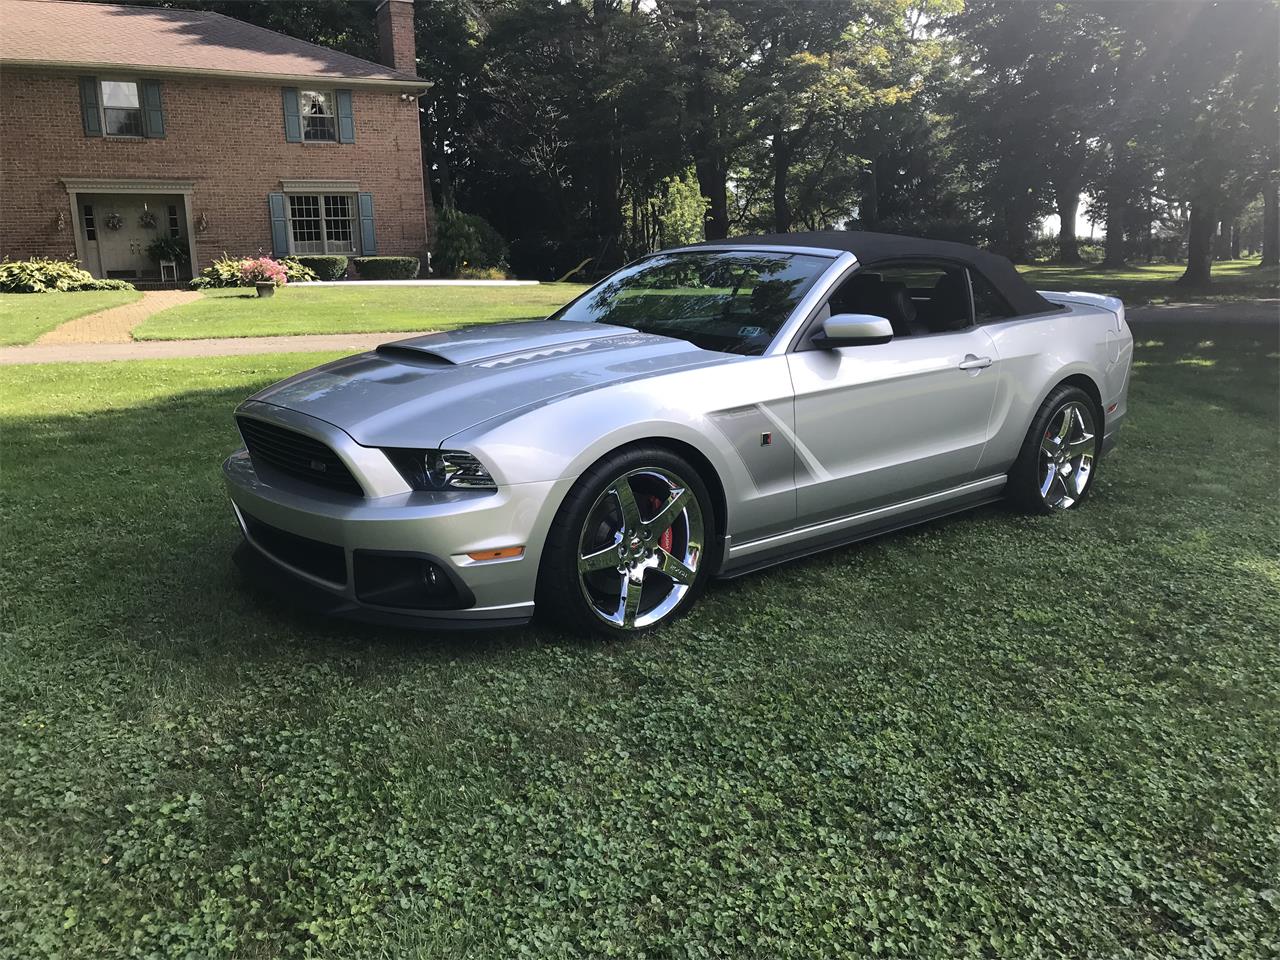 2014 Ford Mustang (Roush) for sale in Ebensburg, PA